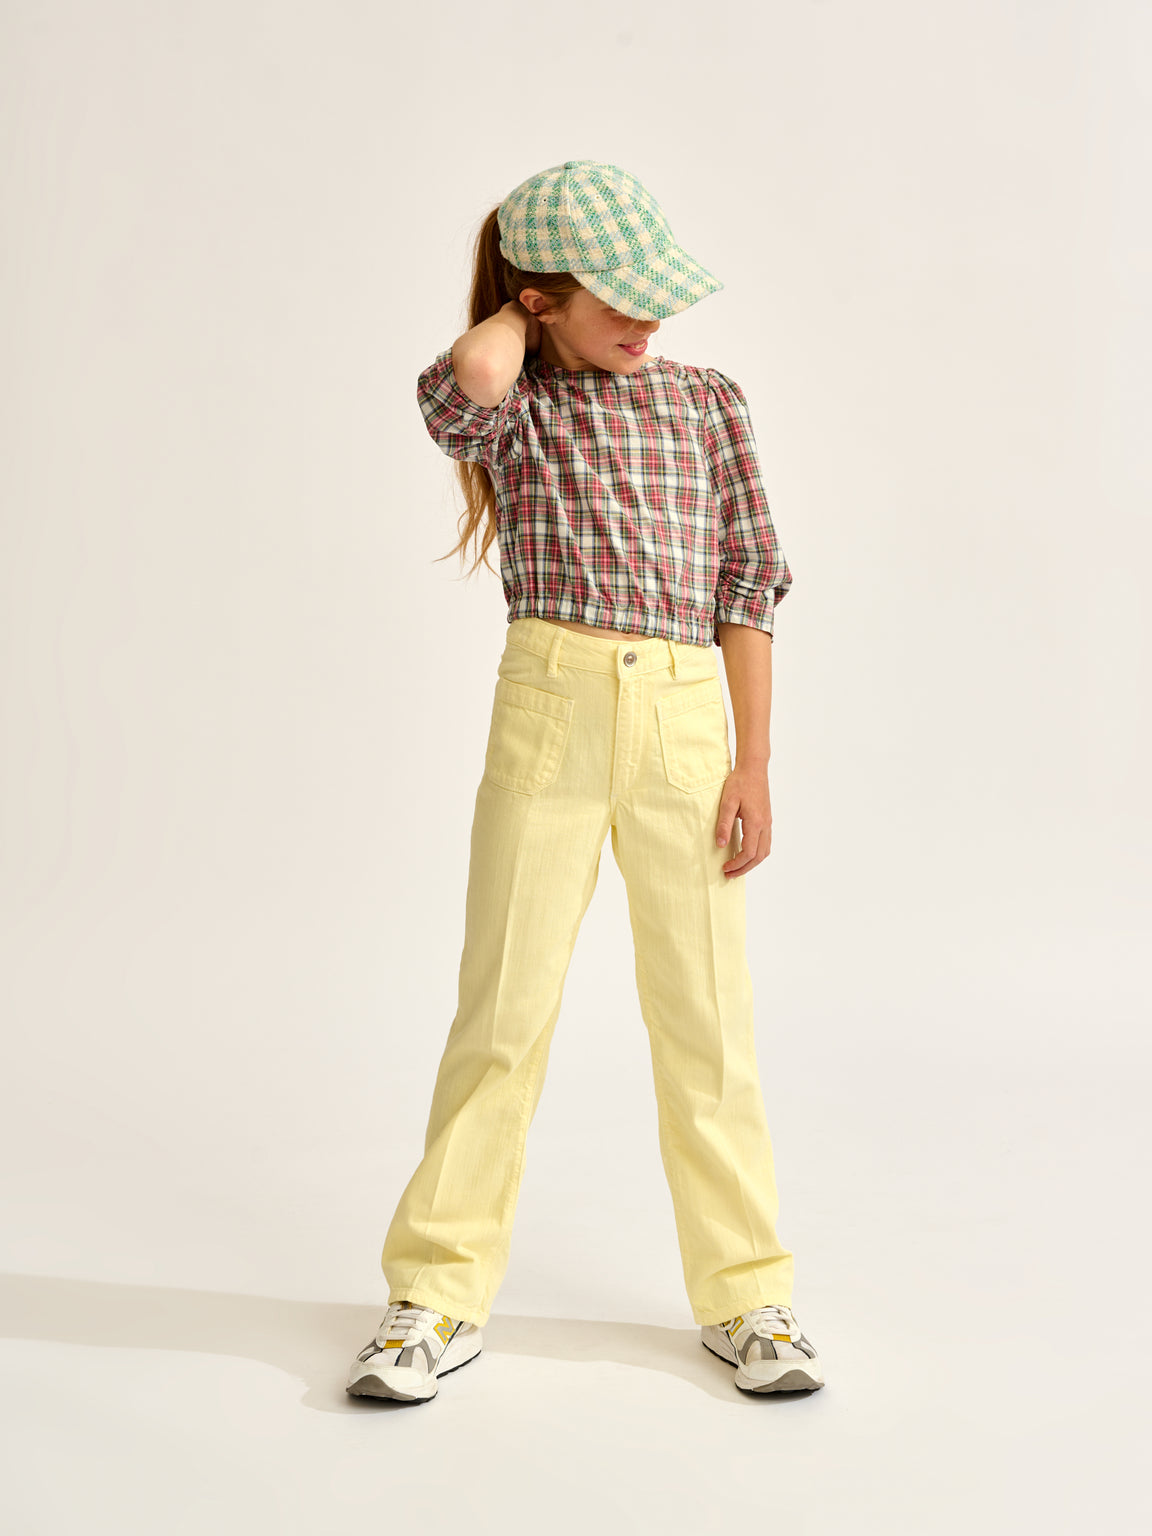 Pepy Trousers - Beige | Girls Collection | Bellerose